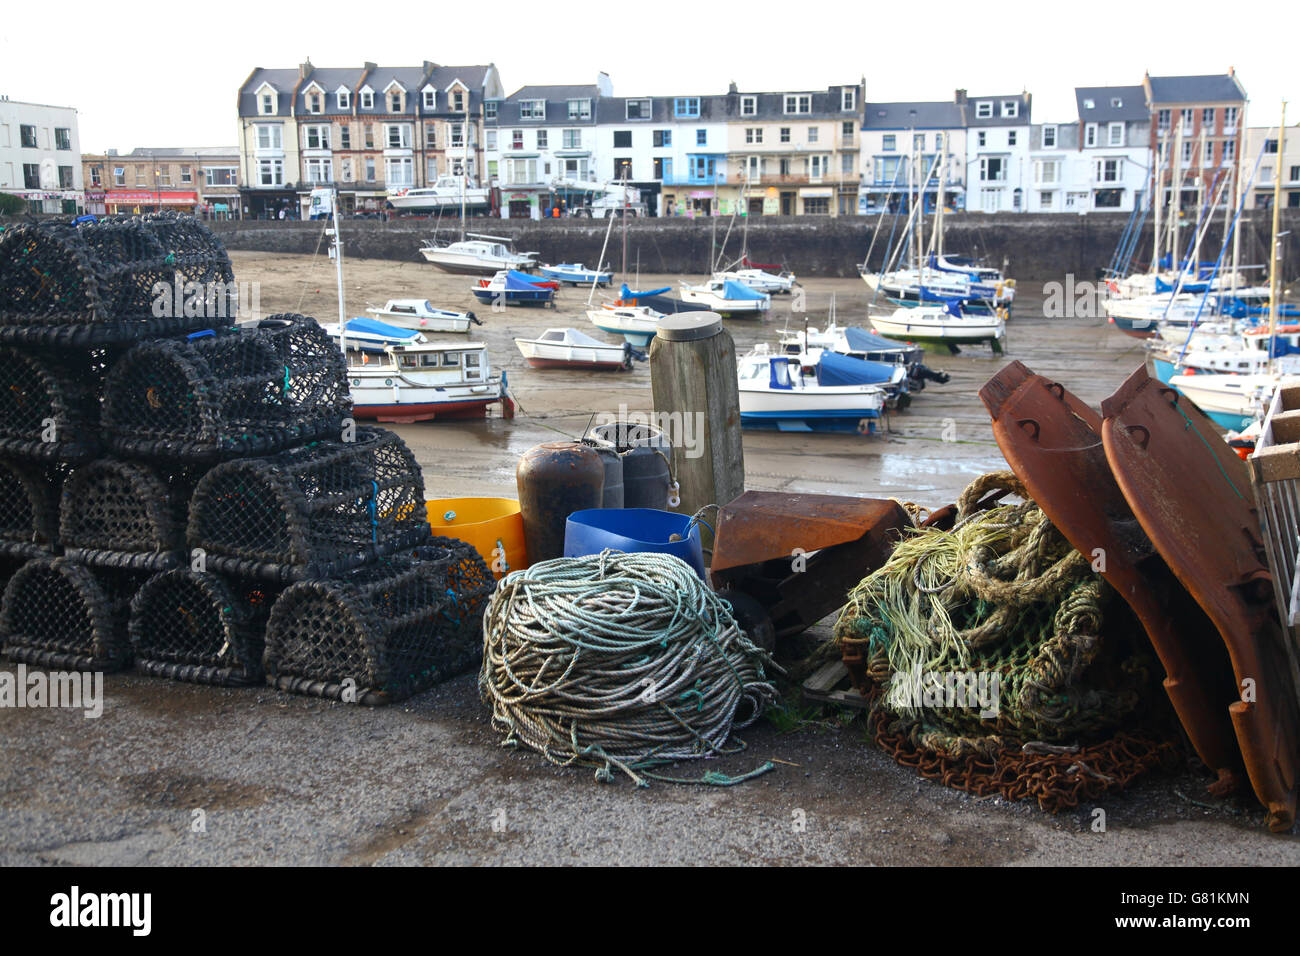 Lobster pots and other fishing equipment stacked on the quay at Ilfracombe awaiting loading the next fishing boat. Stock Photo